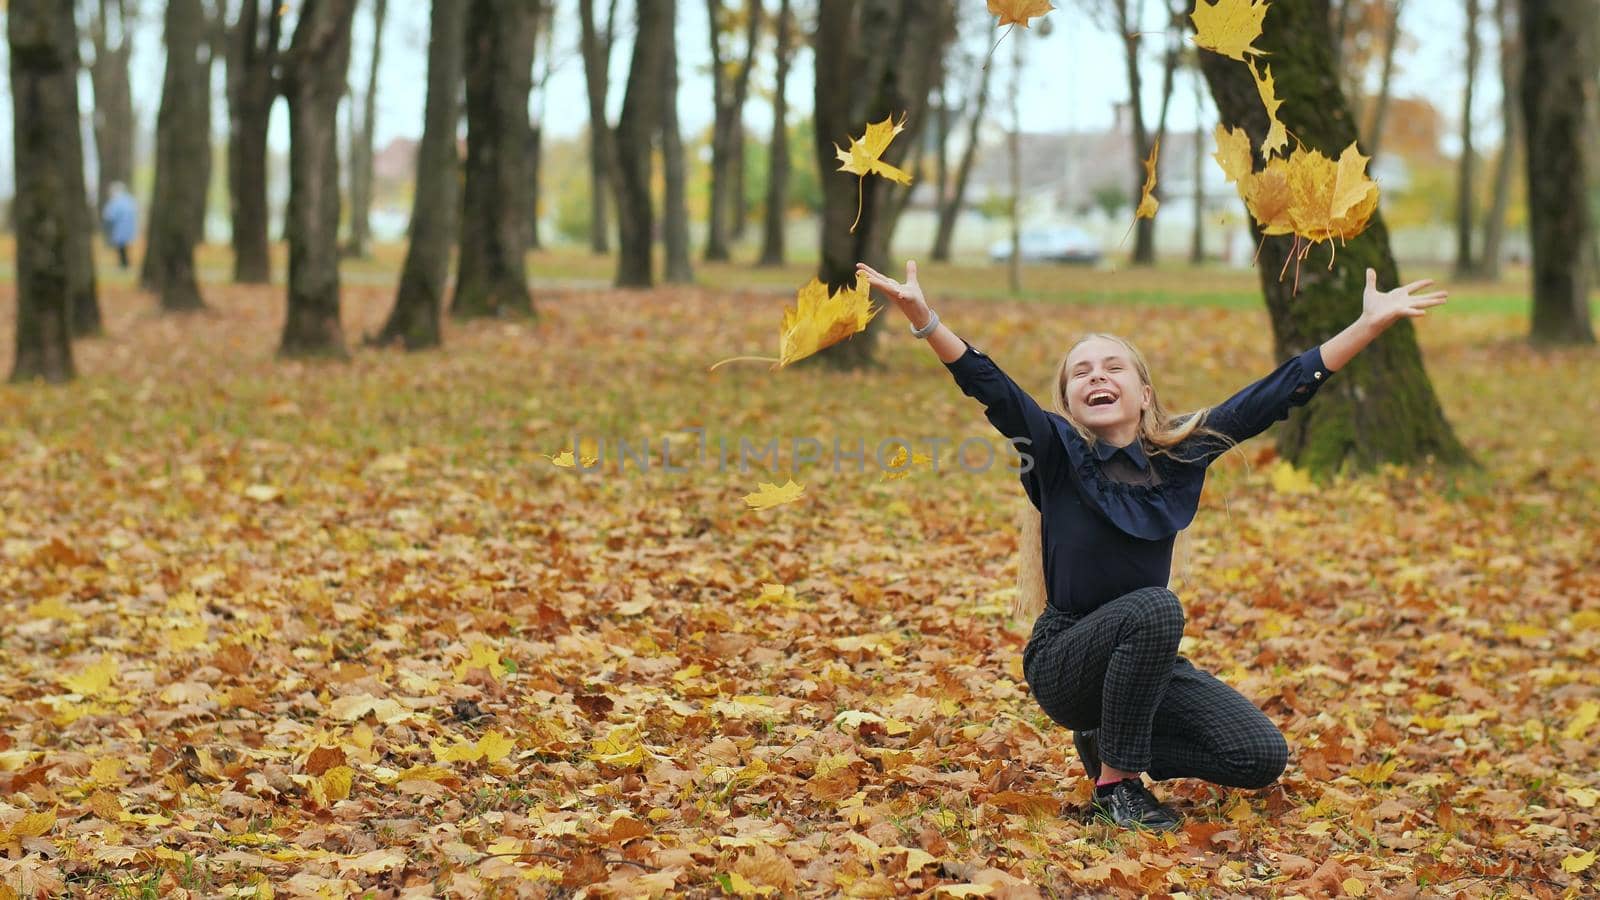 A young girl schoolgirl throws autumn leaves in a city park. Slow motion